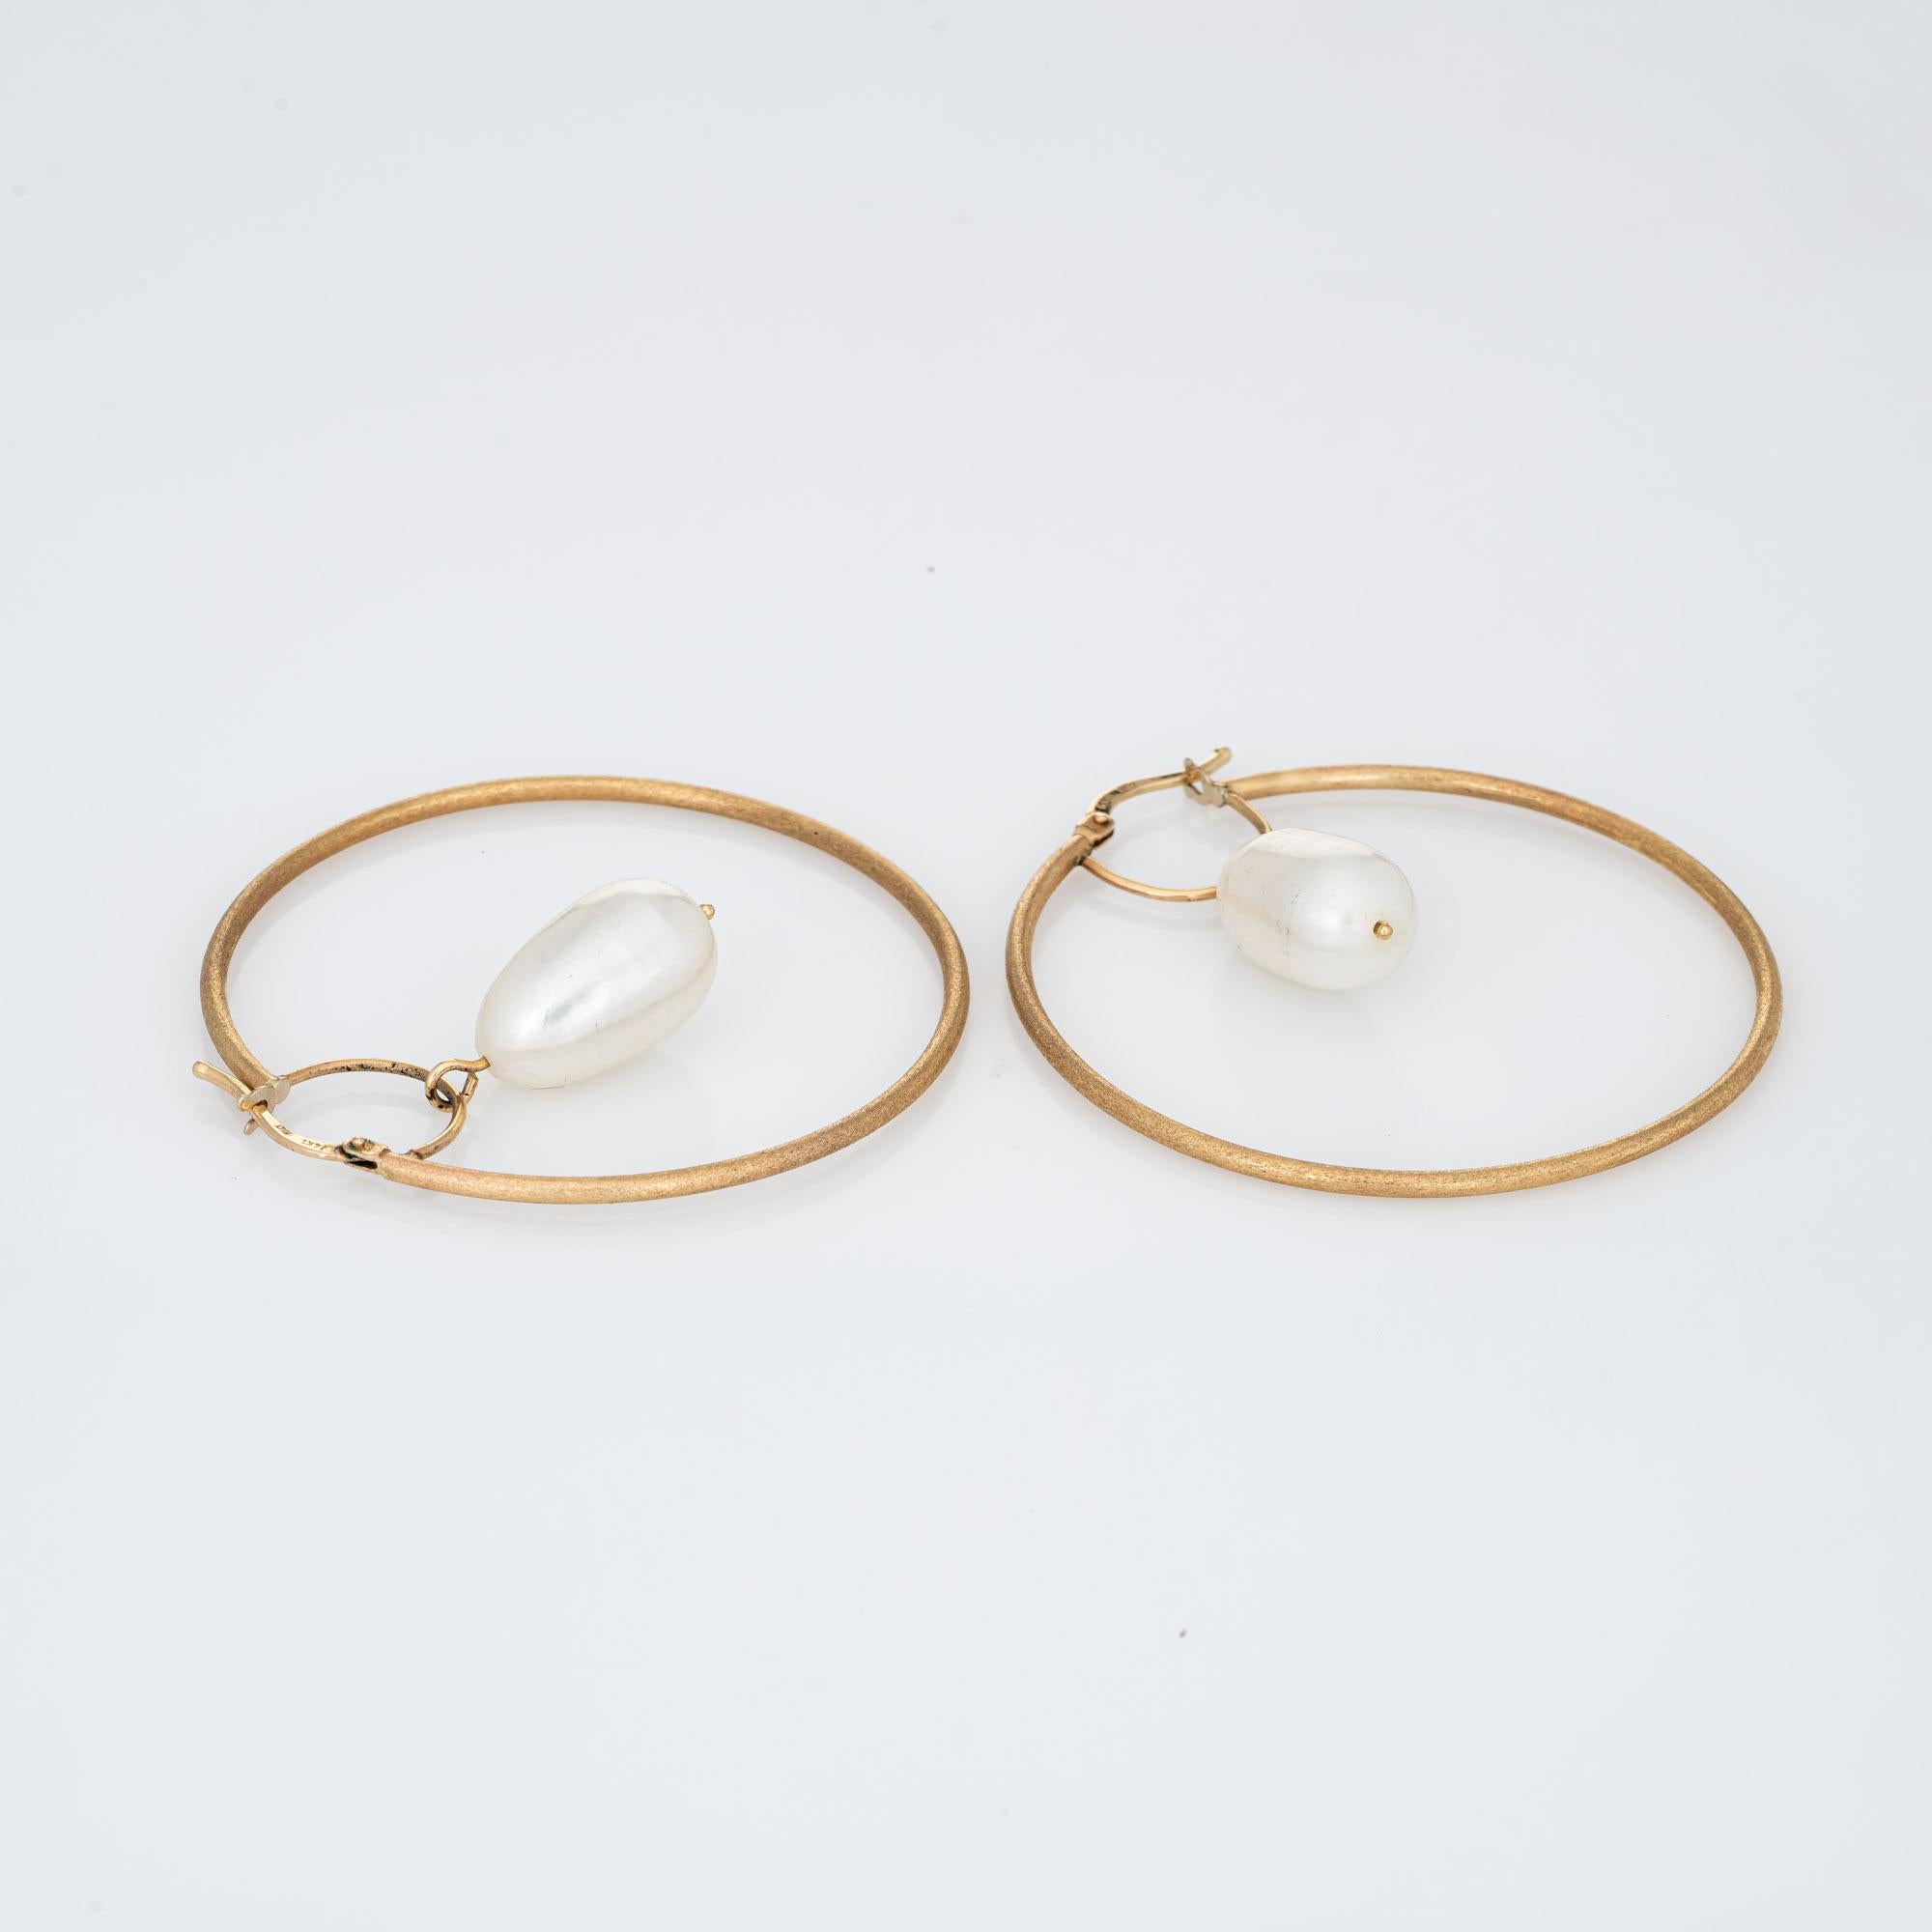 Elegant pair of estate freshwater pearl hoop earrings crafted in 14k yellow gold. 

Freshwater pearls each measure 15.5mm x 9mm. The pearls are well matching with light green to rose overtones. 

The pearls are uniquely set into semi-circle drops